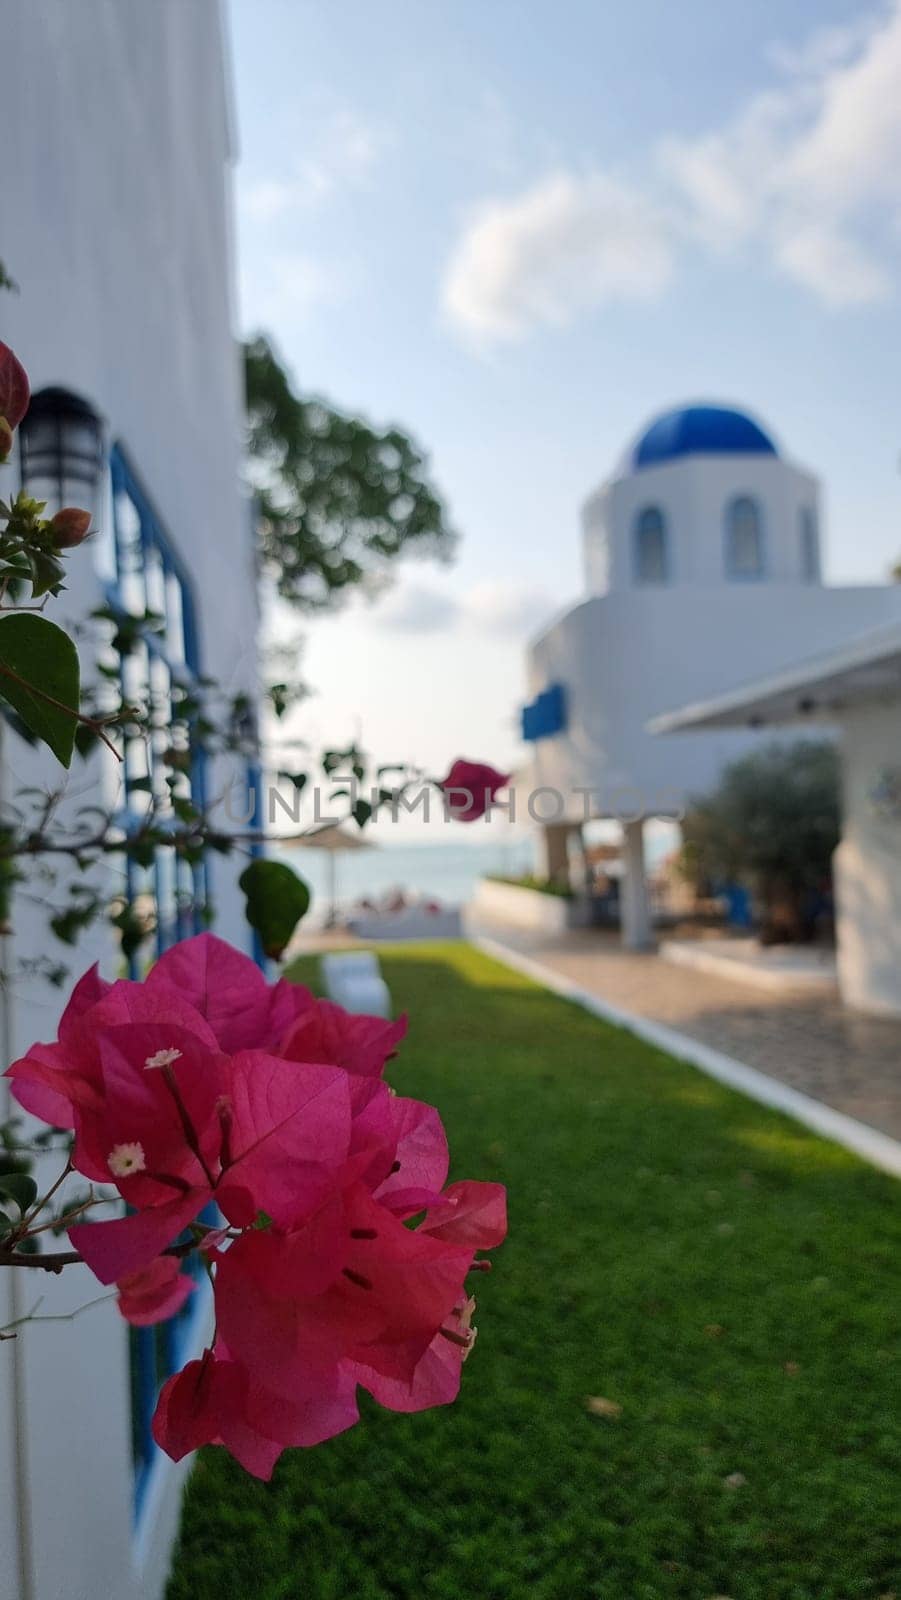 A white building with a blue roof stands gracefully in the background, while a delicate pink flower blooms beautifully in the foreground by fokkebok